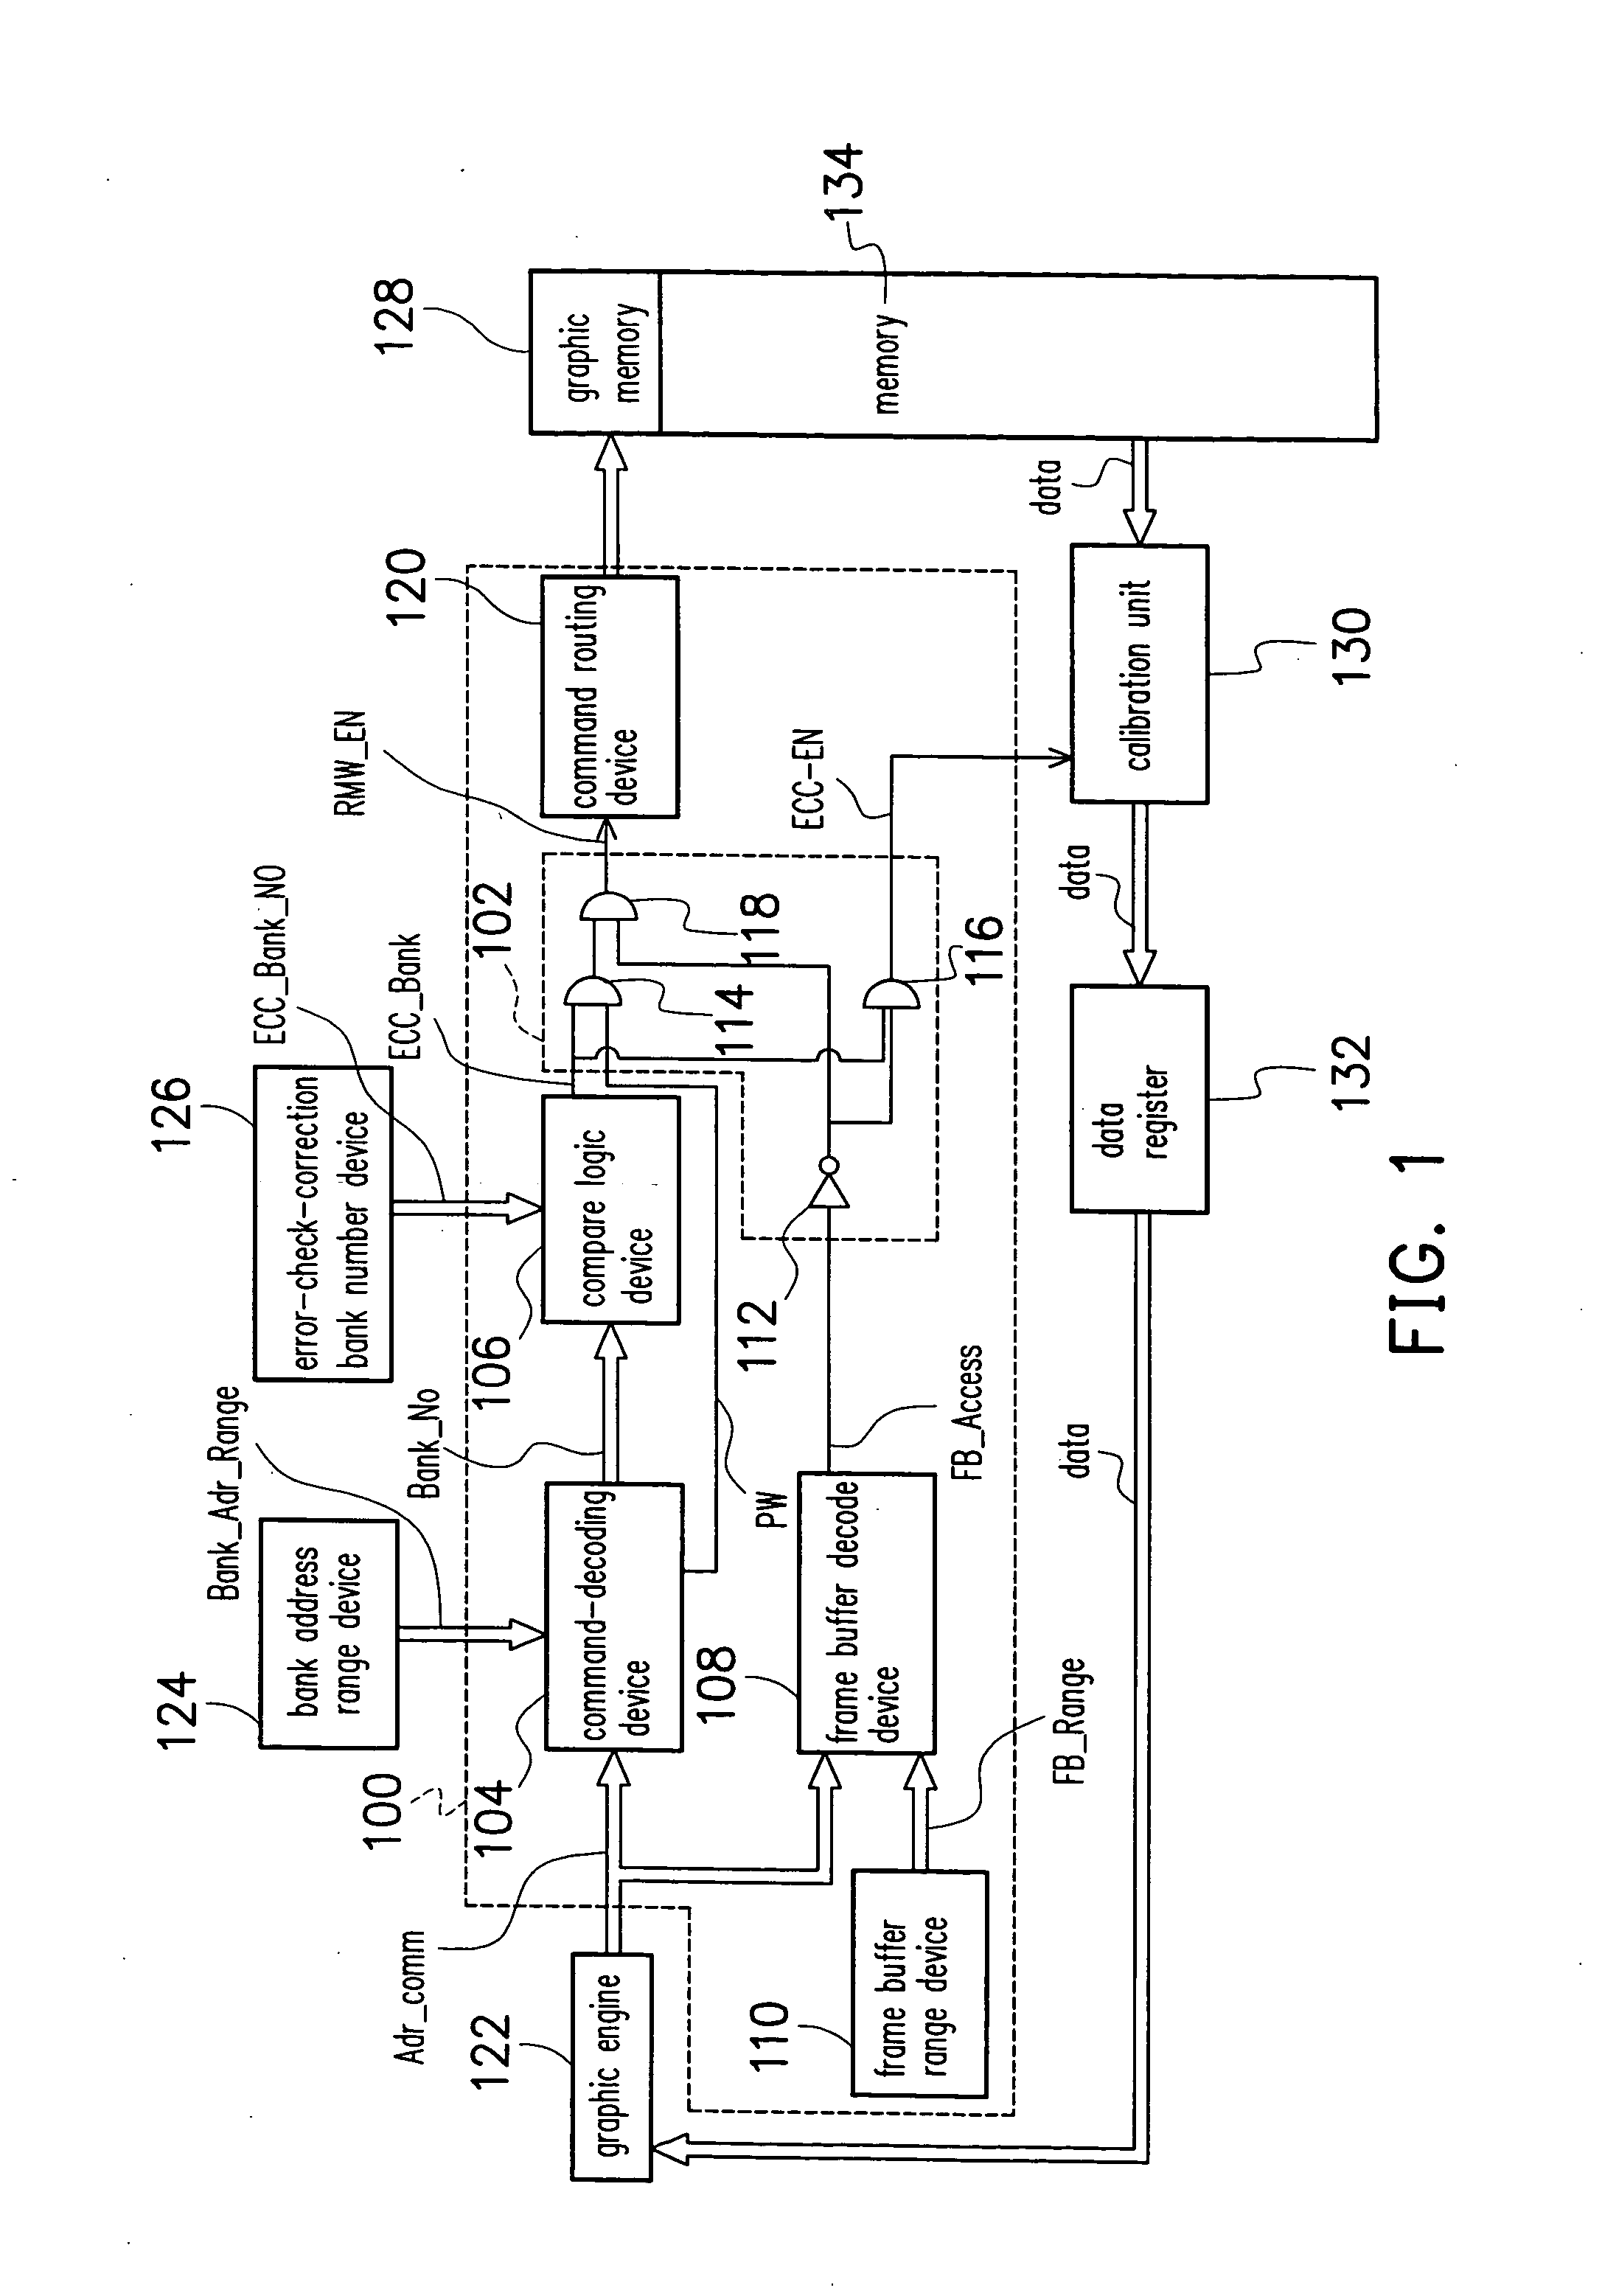 Memory control device and method